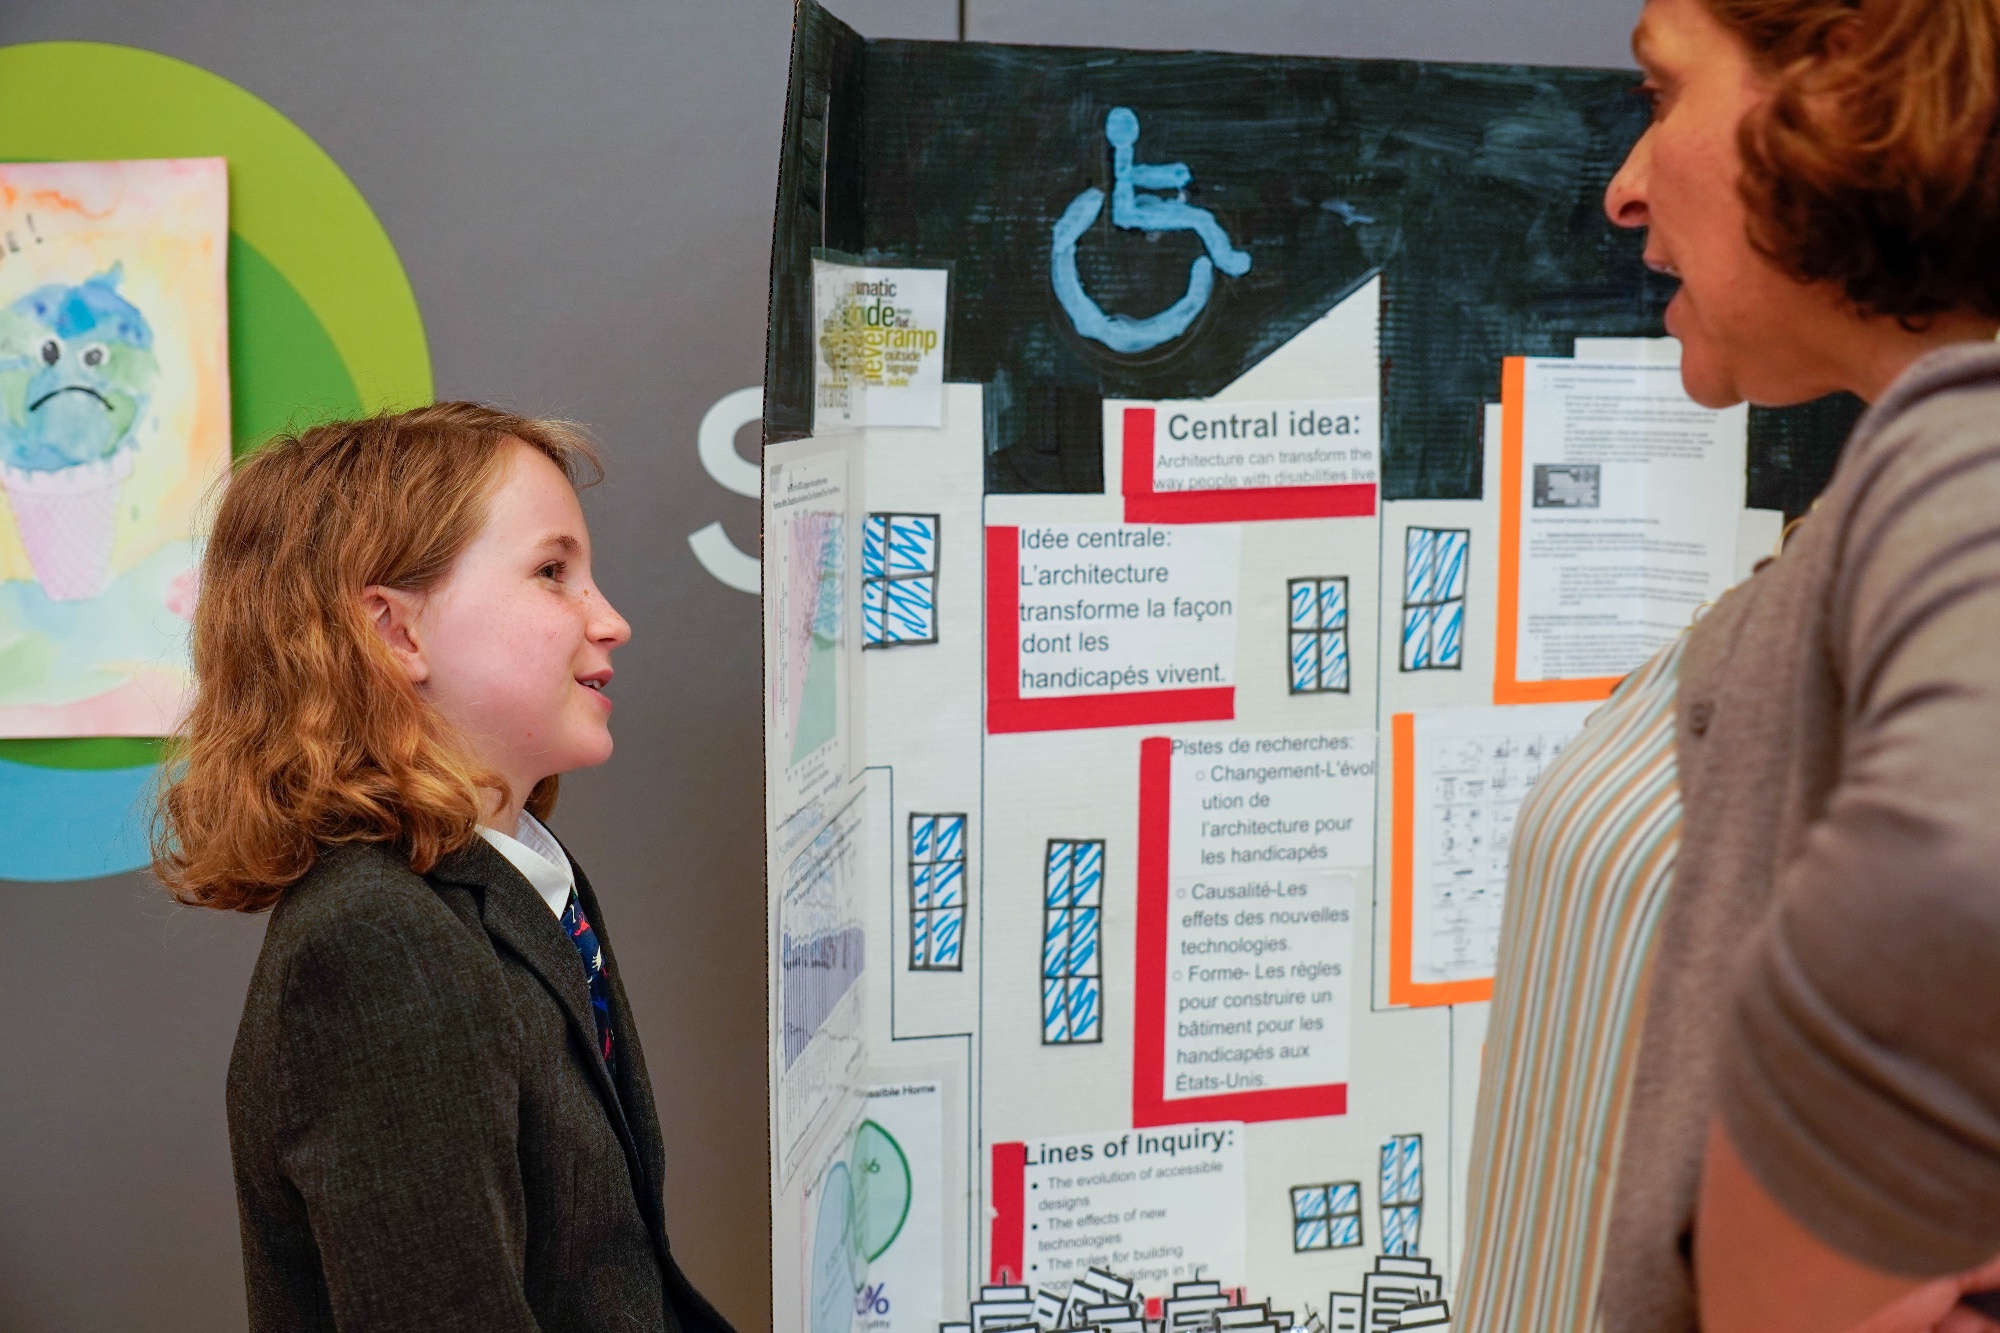 French Program student presenting their PYPx project on Empowering People with Disabilities.